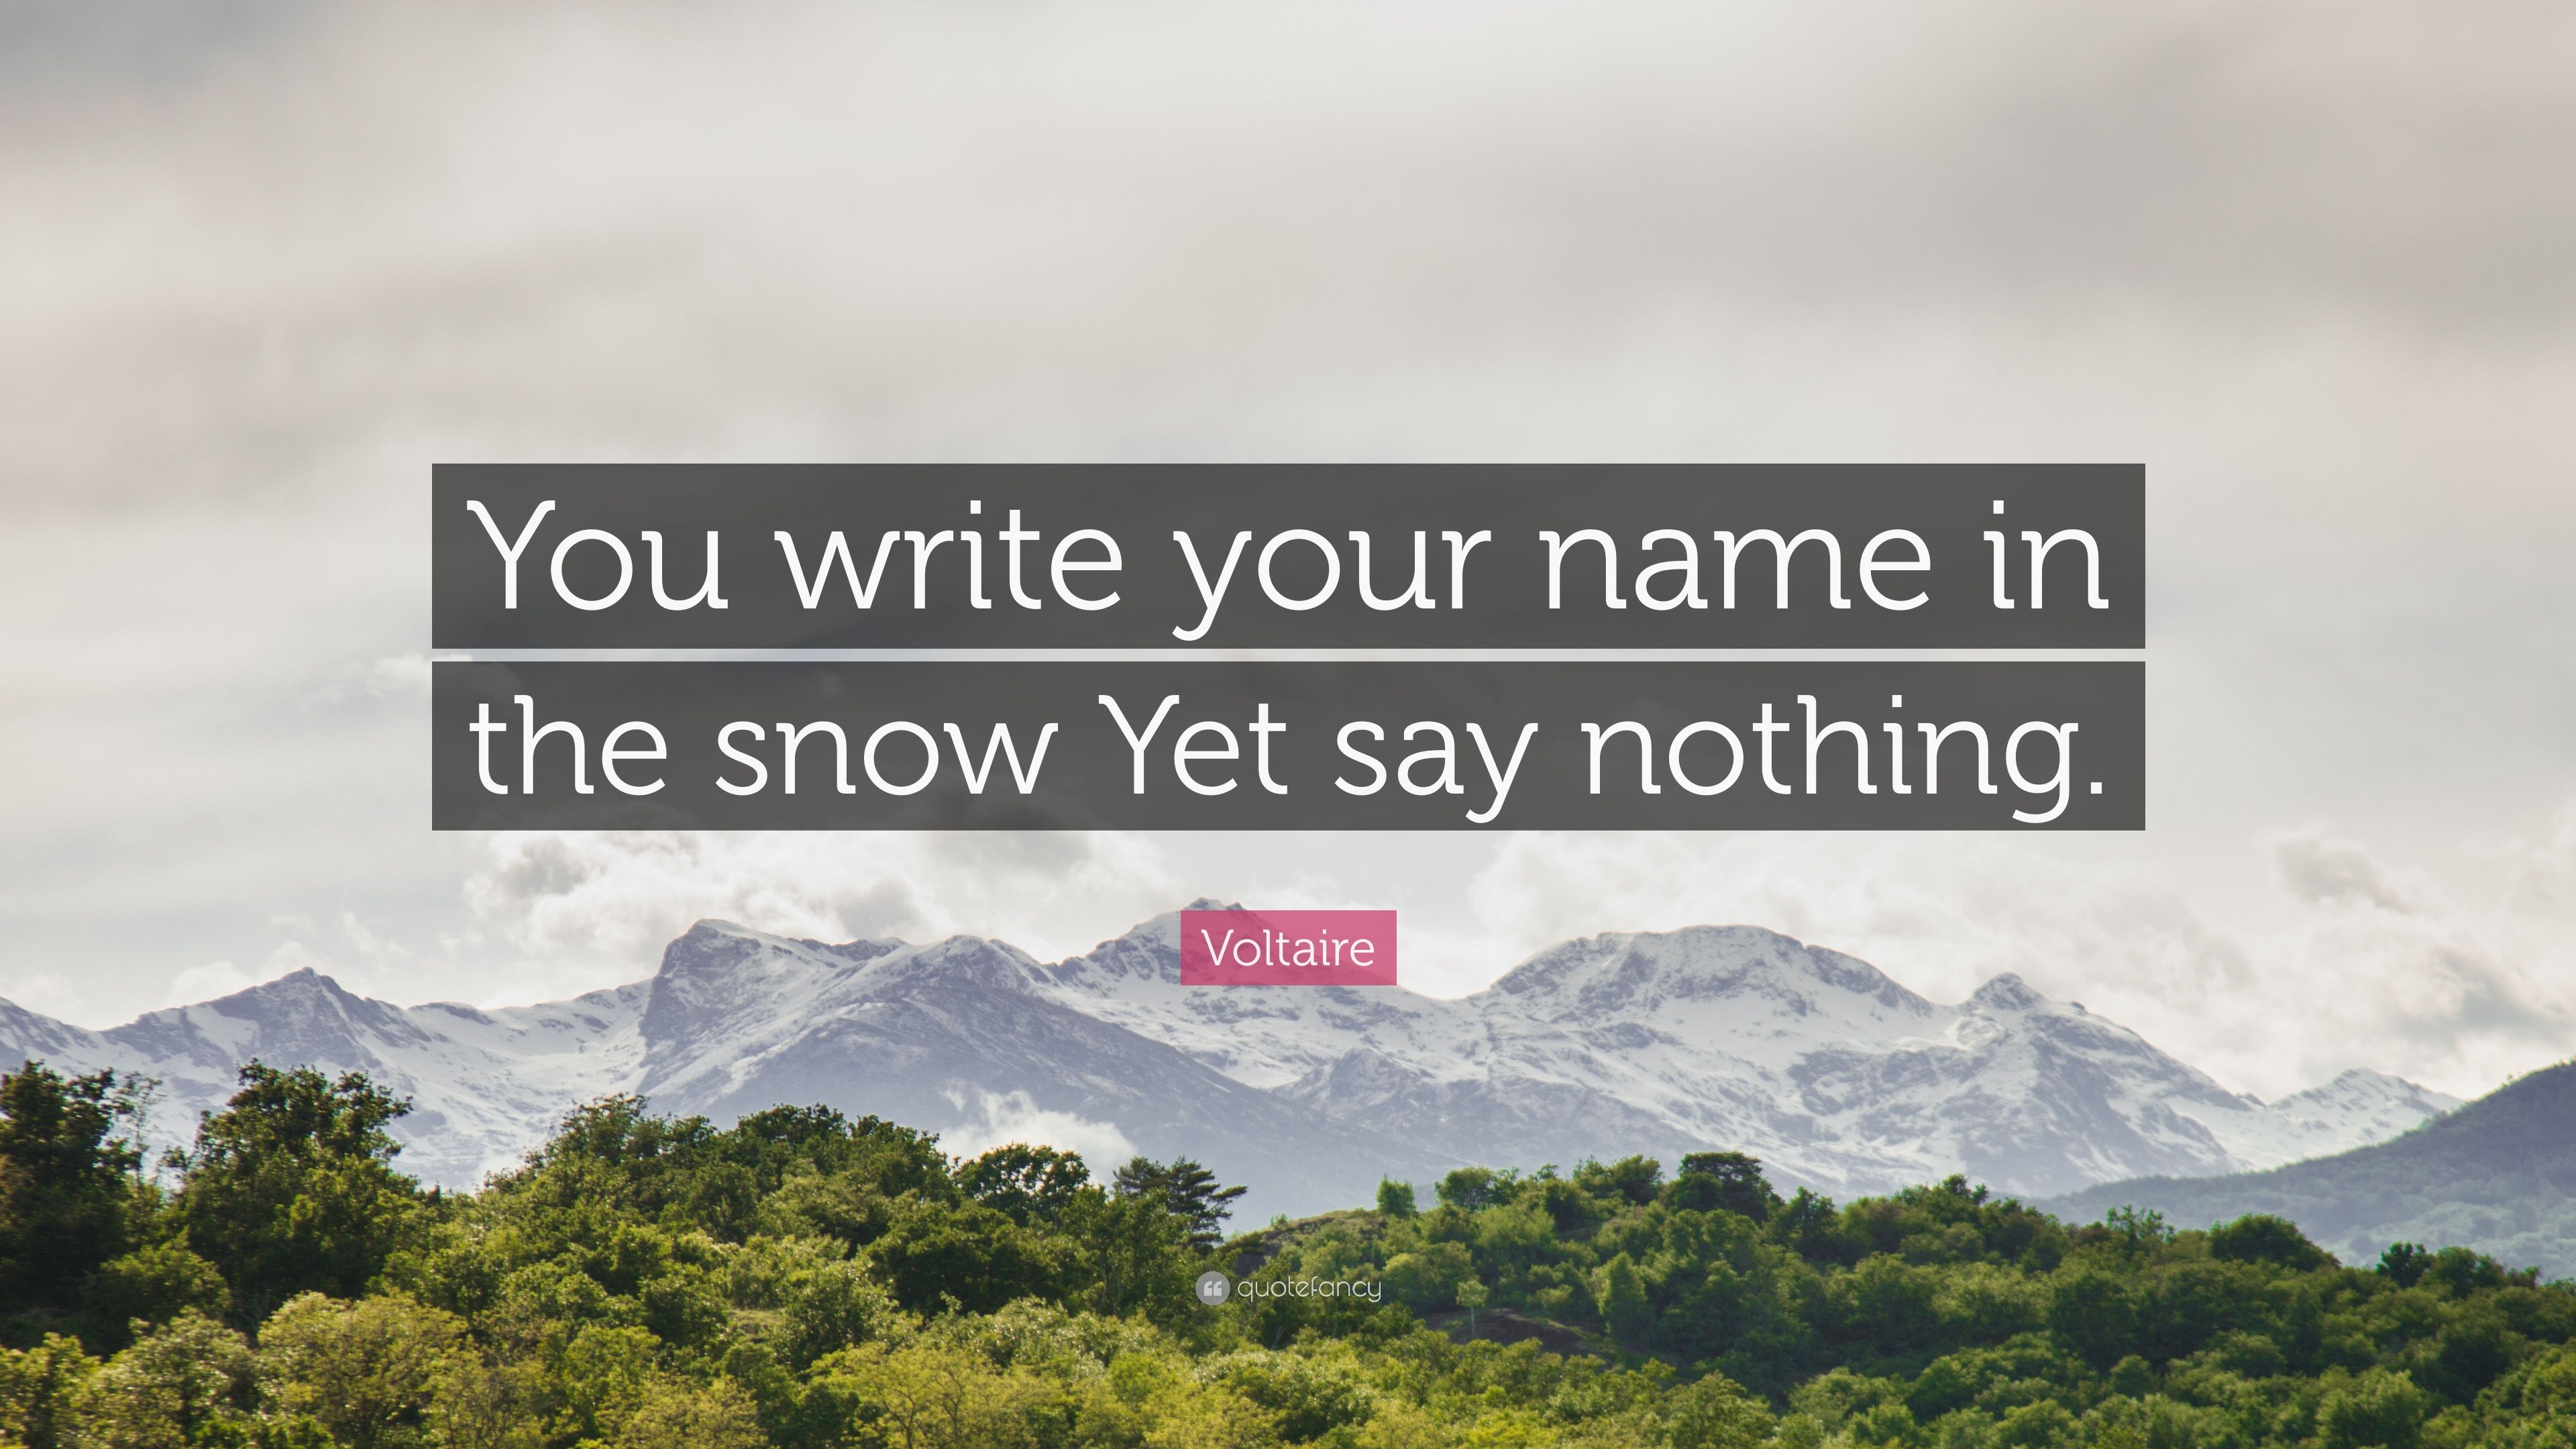 Voltaire Quote: “You write your name in the snow Yet say nothing.” (7 wallpaper)